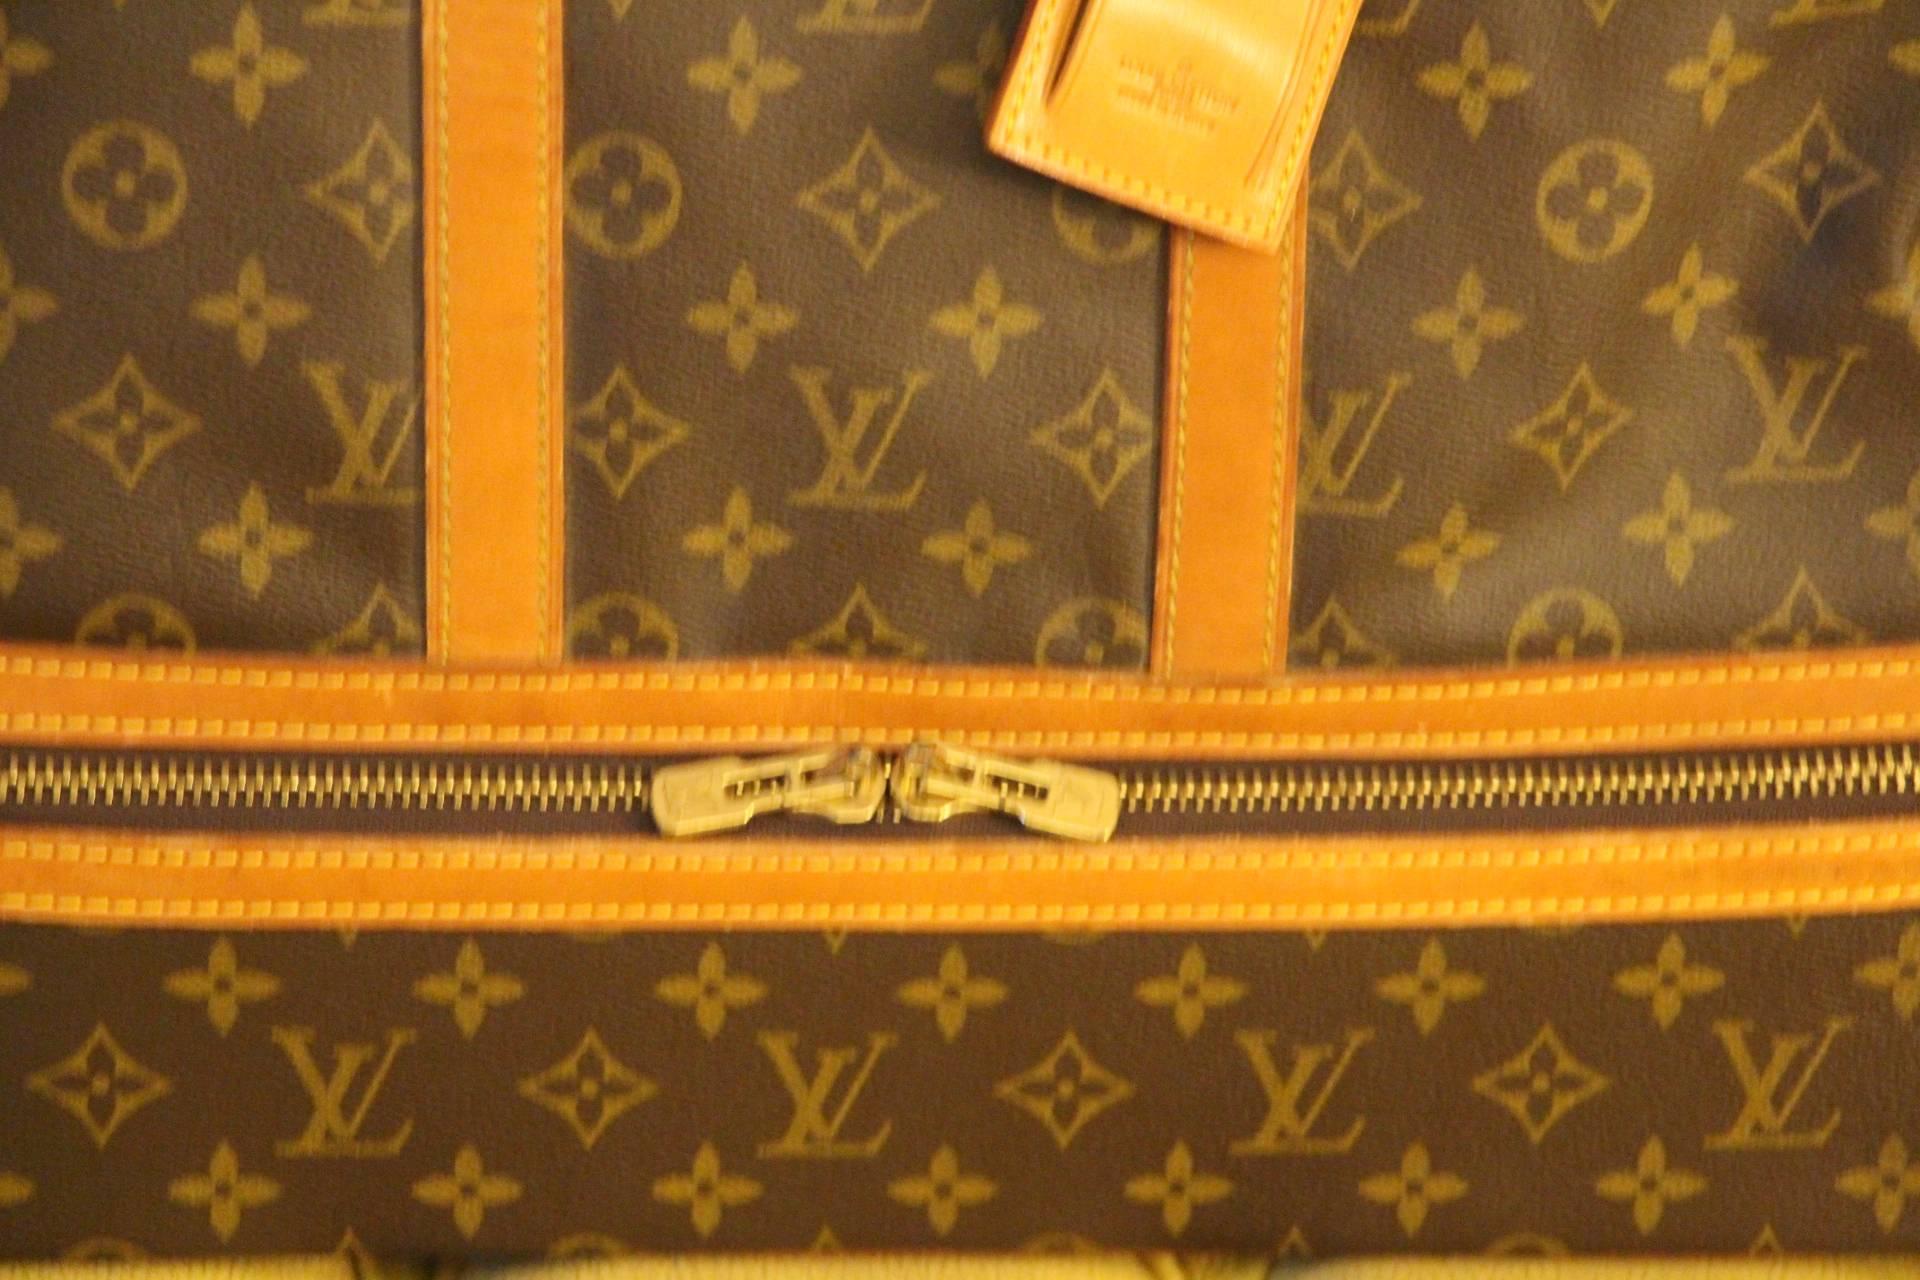 This bag is a very unusual model. Horizontally, it opens on a separate rigid compartment to put fragile items like make up, perfume bottles, after shave and so on. Original LV name holder.
As this bag cannot be found any longer in Louis Vuitton